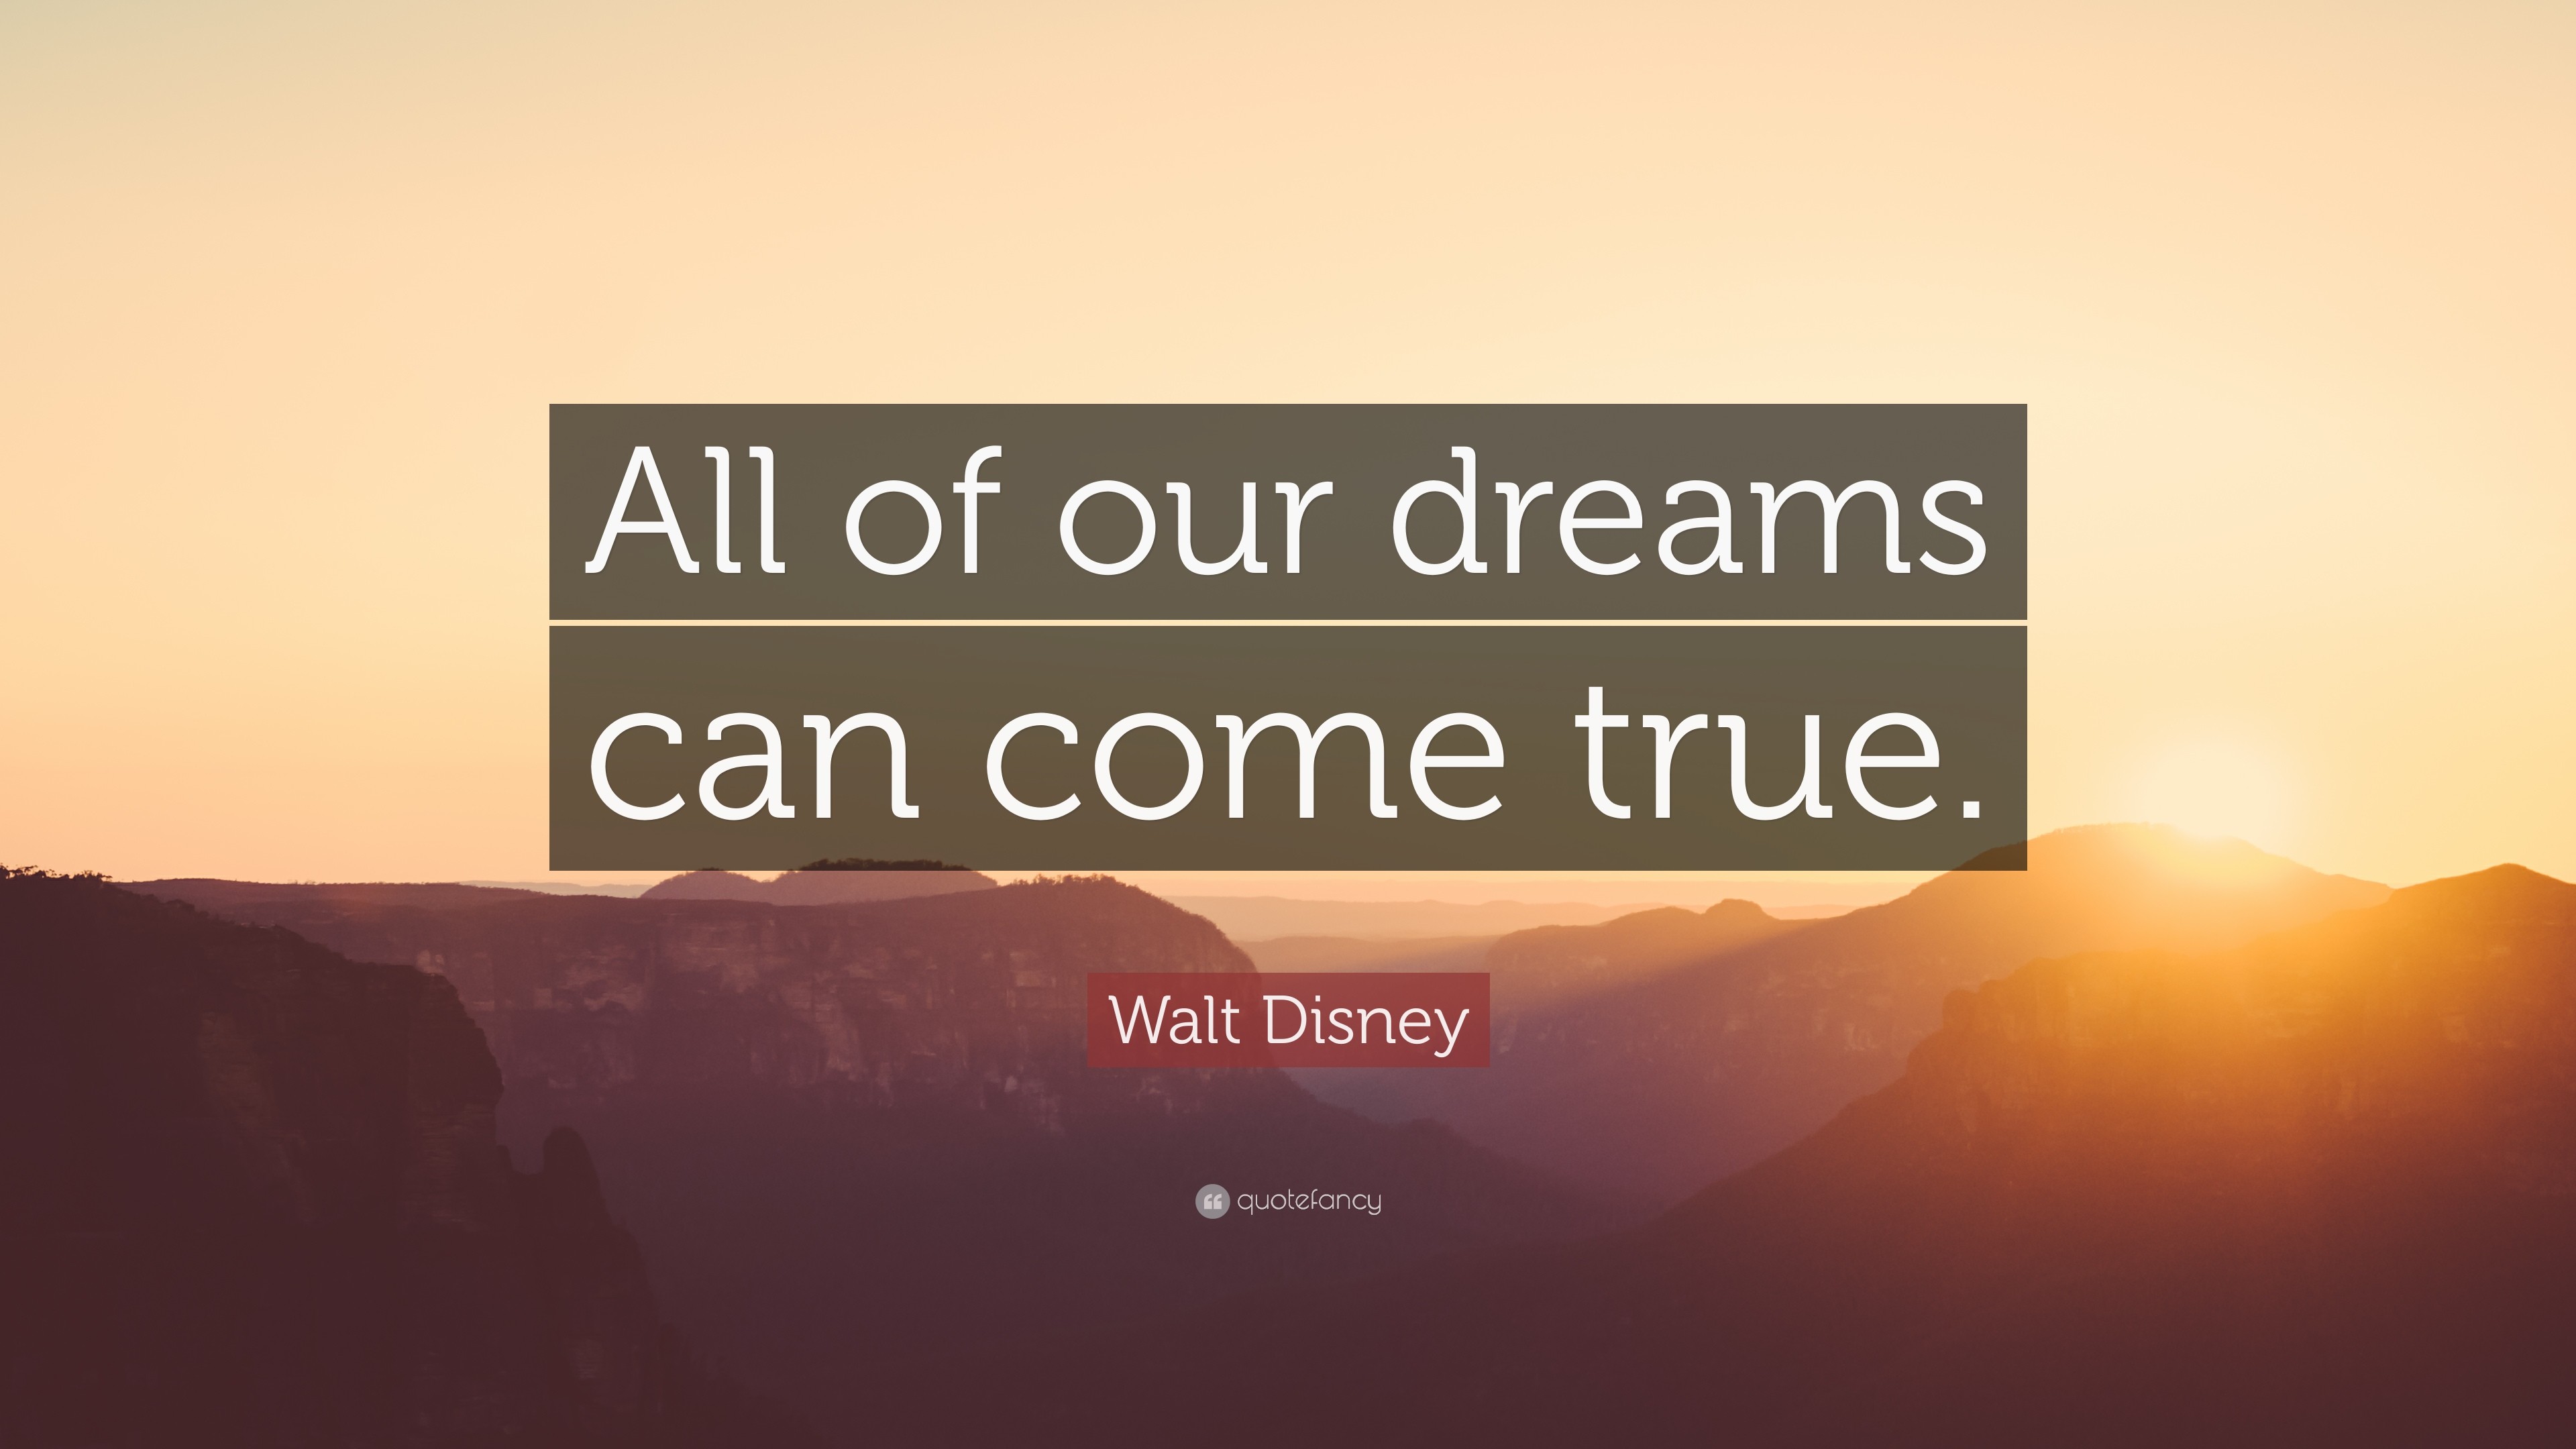 Wallpapers hd walt disney quote all of our dreams can come true 21